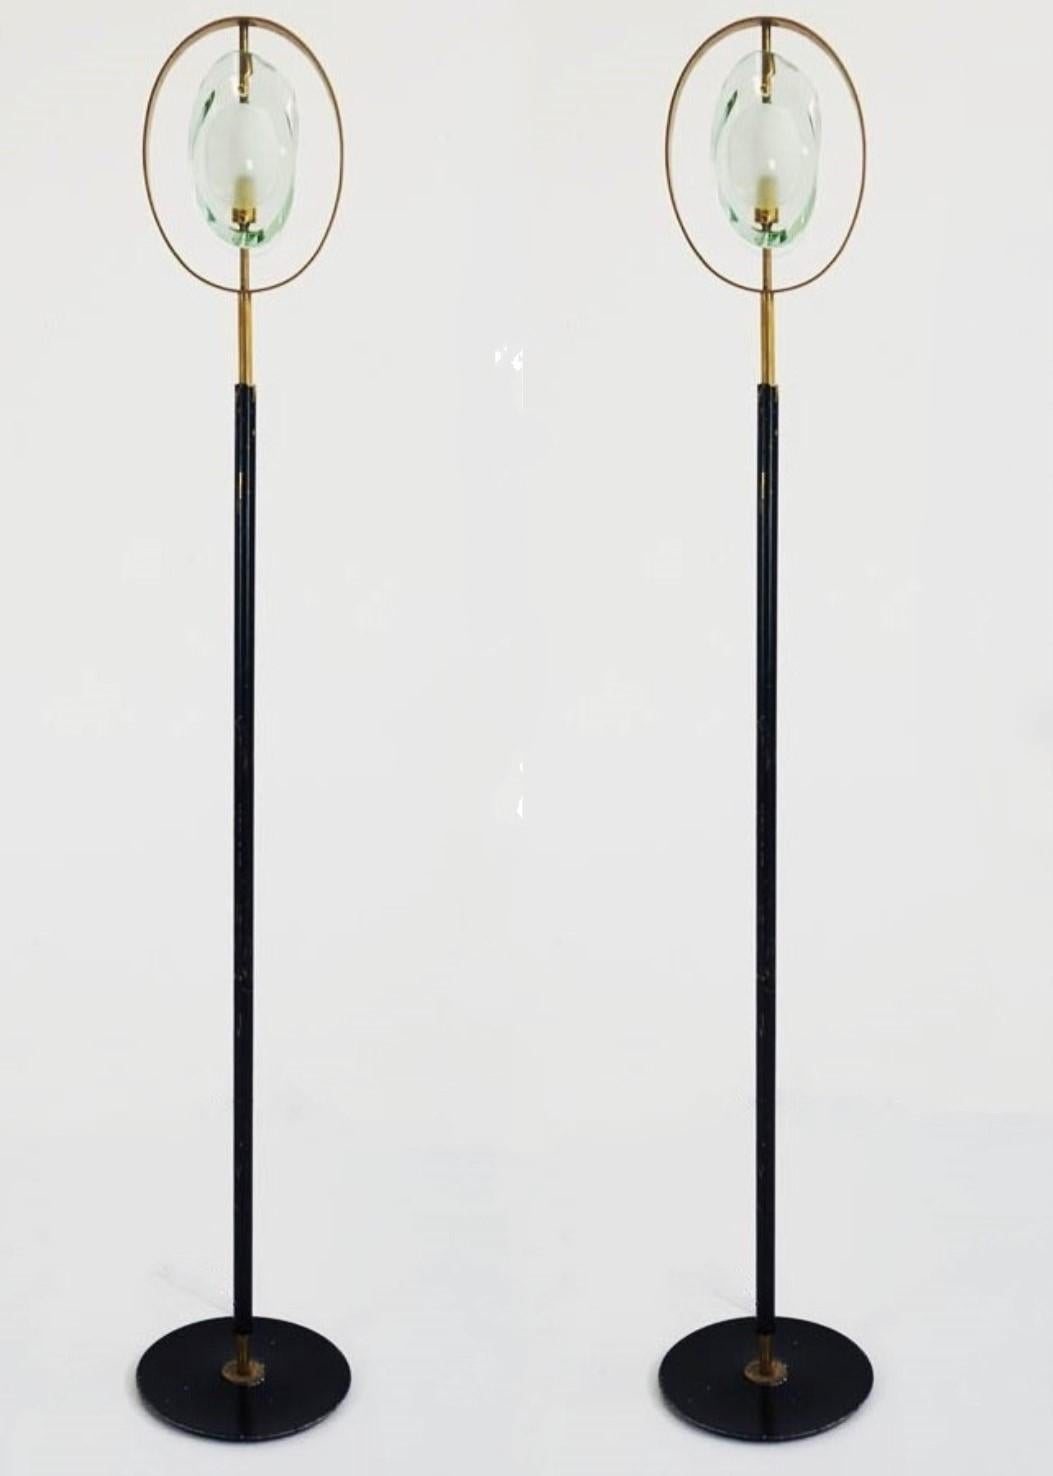 A pair of elegant floor lamps designed by Max Ingrand for Fontana Arte, Model 2020, Italy, 1961. Organically shaped double lens cutted with chisel panels of thick Murano polished glass with sandblasted centers fitted within a natural brass ring